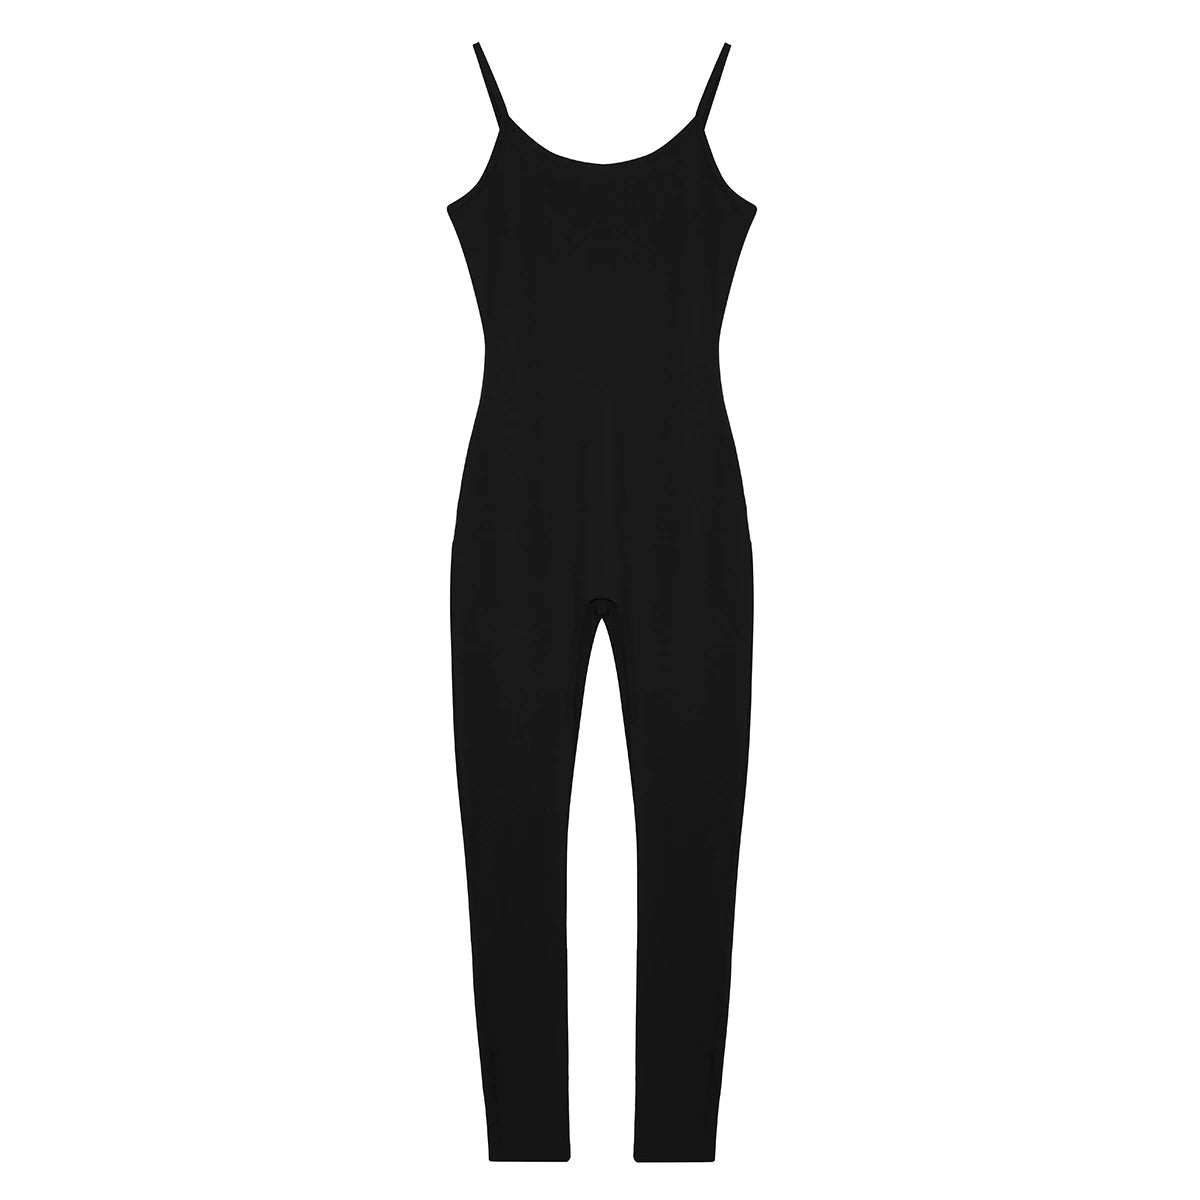 Women Adult One-piece Spaghetti Strapped Footless Stretchy Solid Jumpsuit - HARD'N'HEAVY